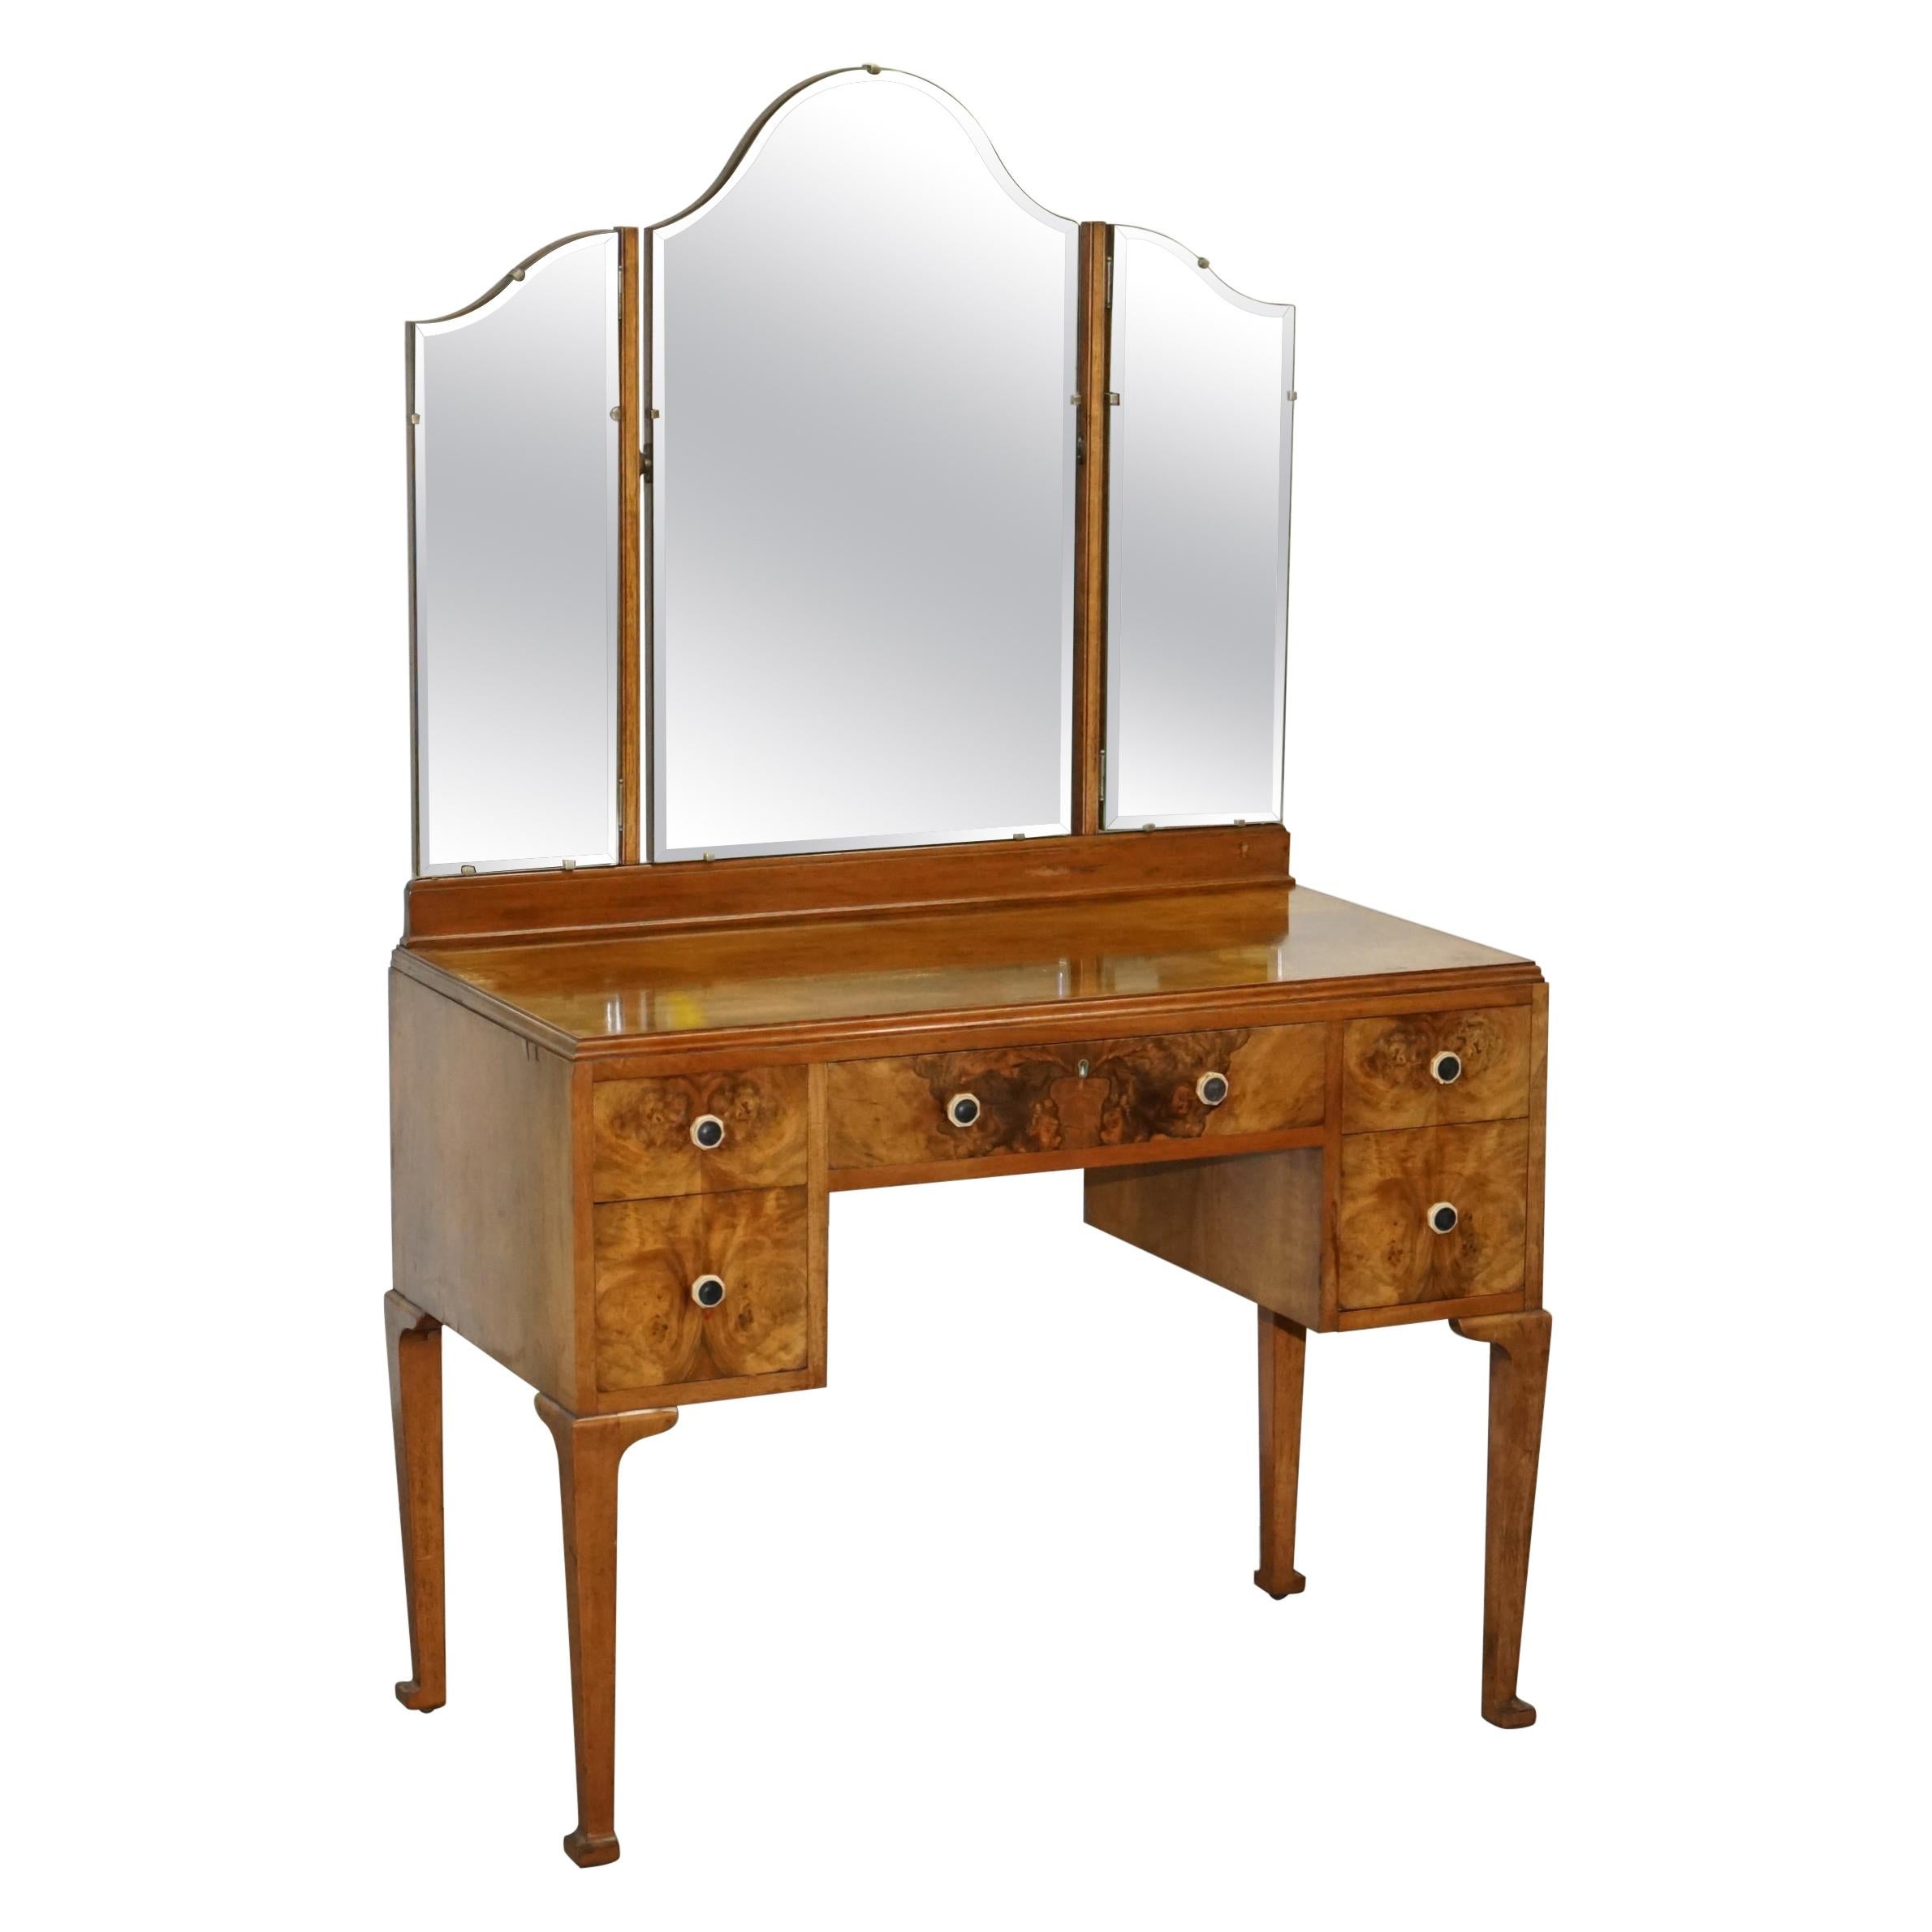 Quality circa 1940's Burr & Burl Walnut Dressing Table with Trifold Mirrors